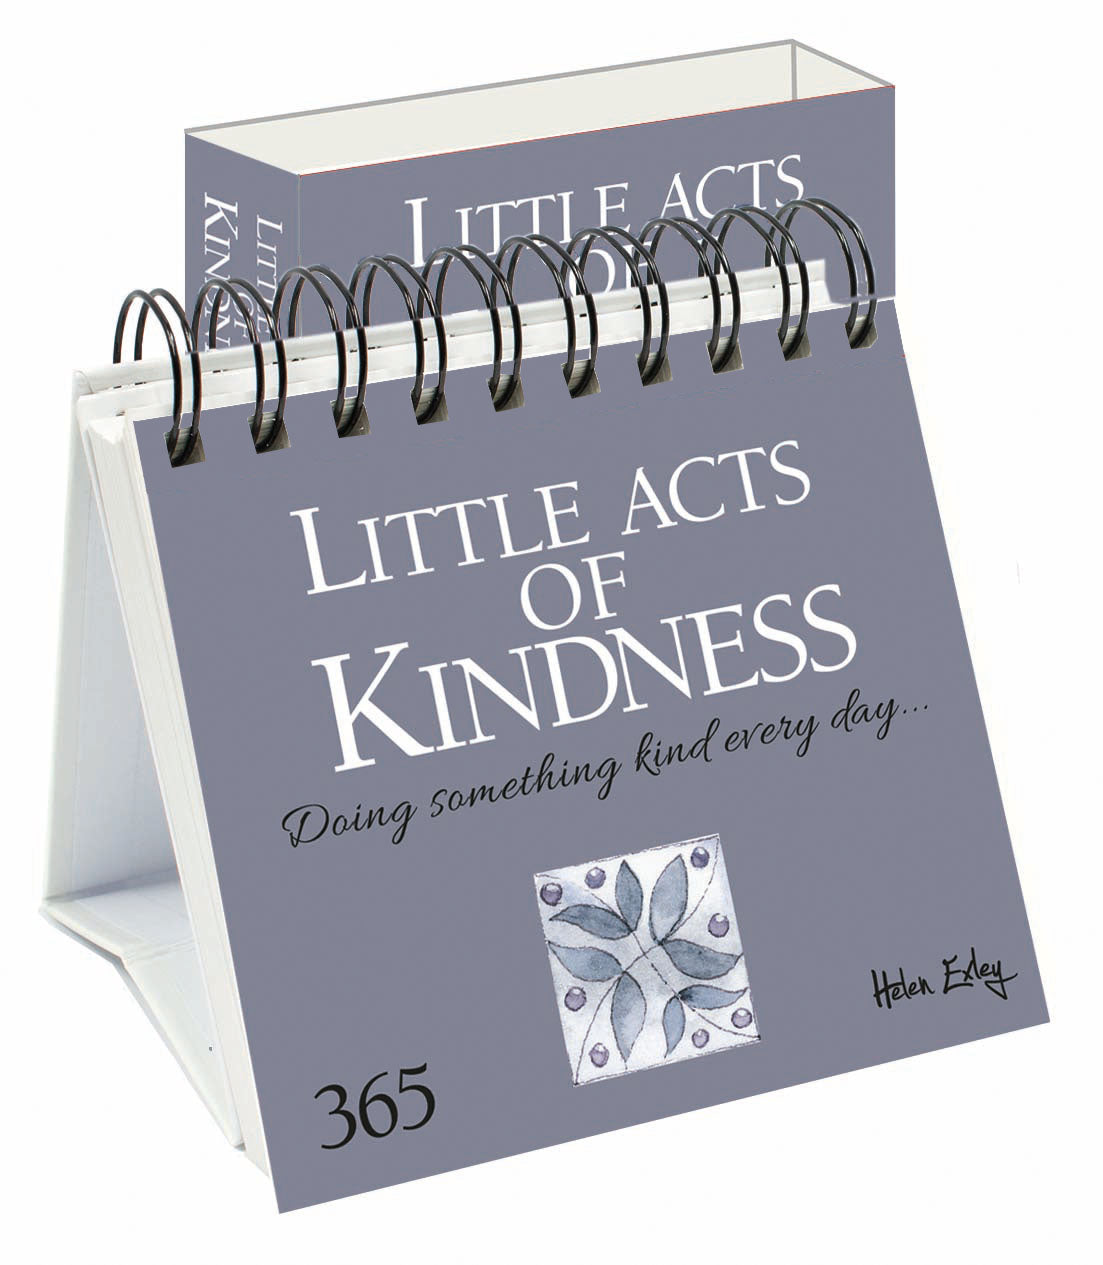 365 Little Acts of Kindness - Doing Something kind everyday...